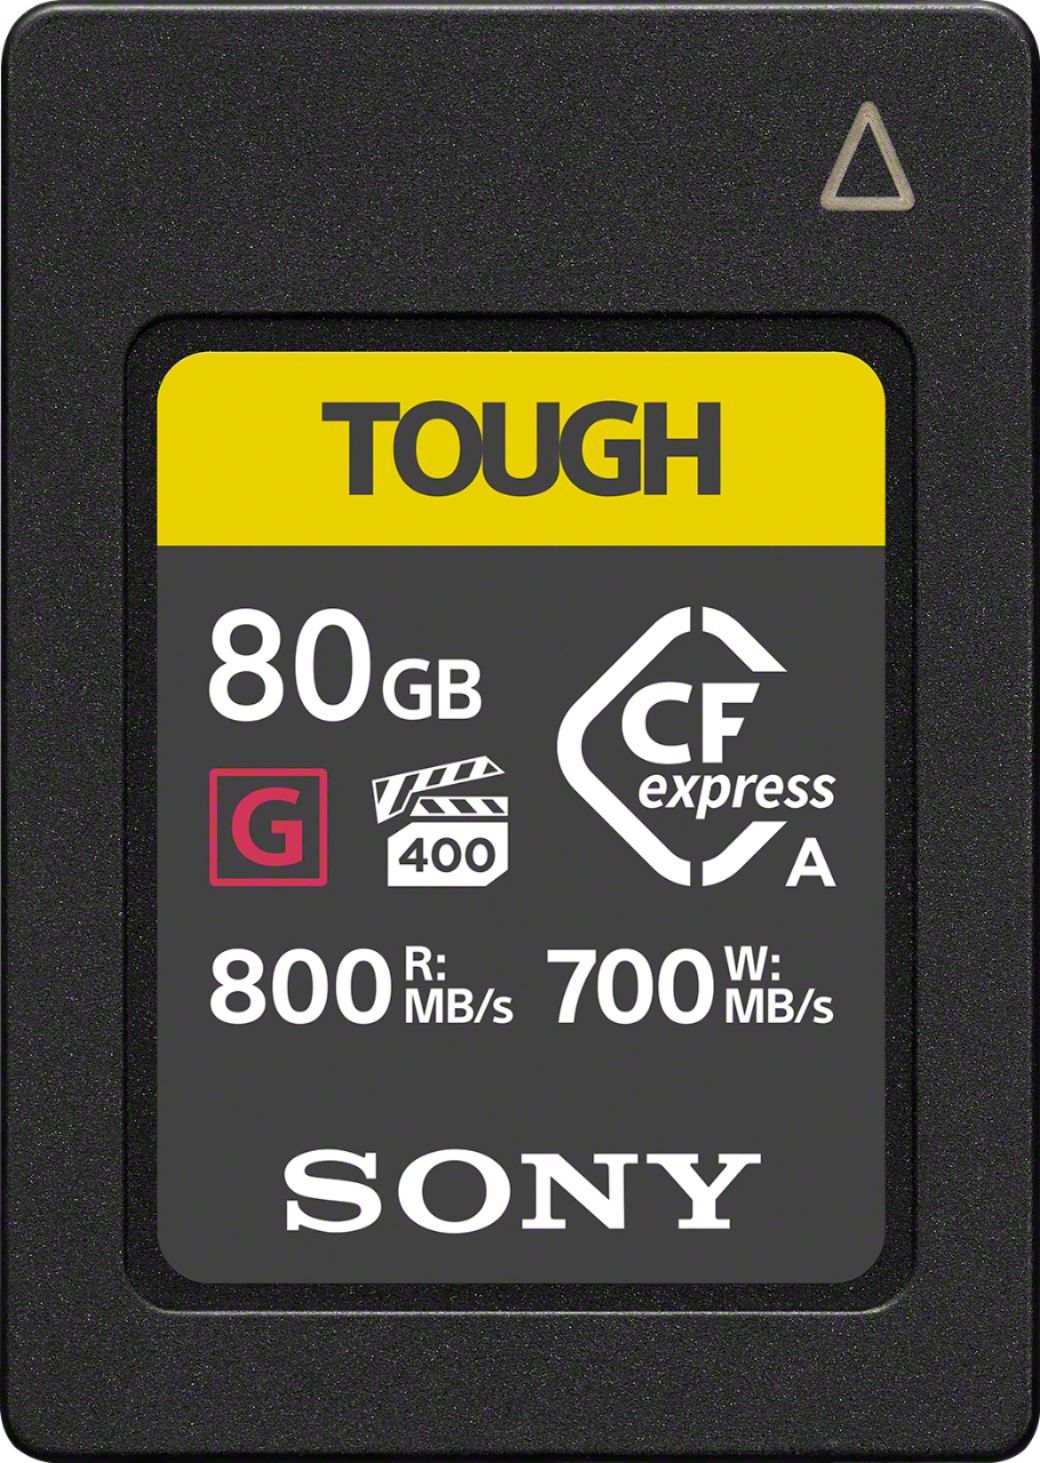 Sony TOUGH Series 80GB CFexpress Type A Memory Card